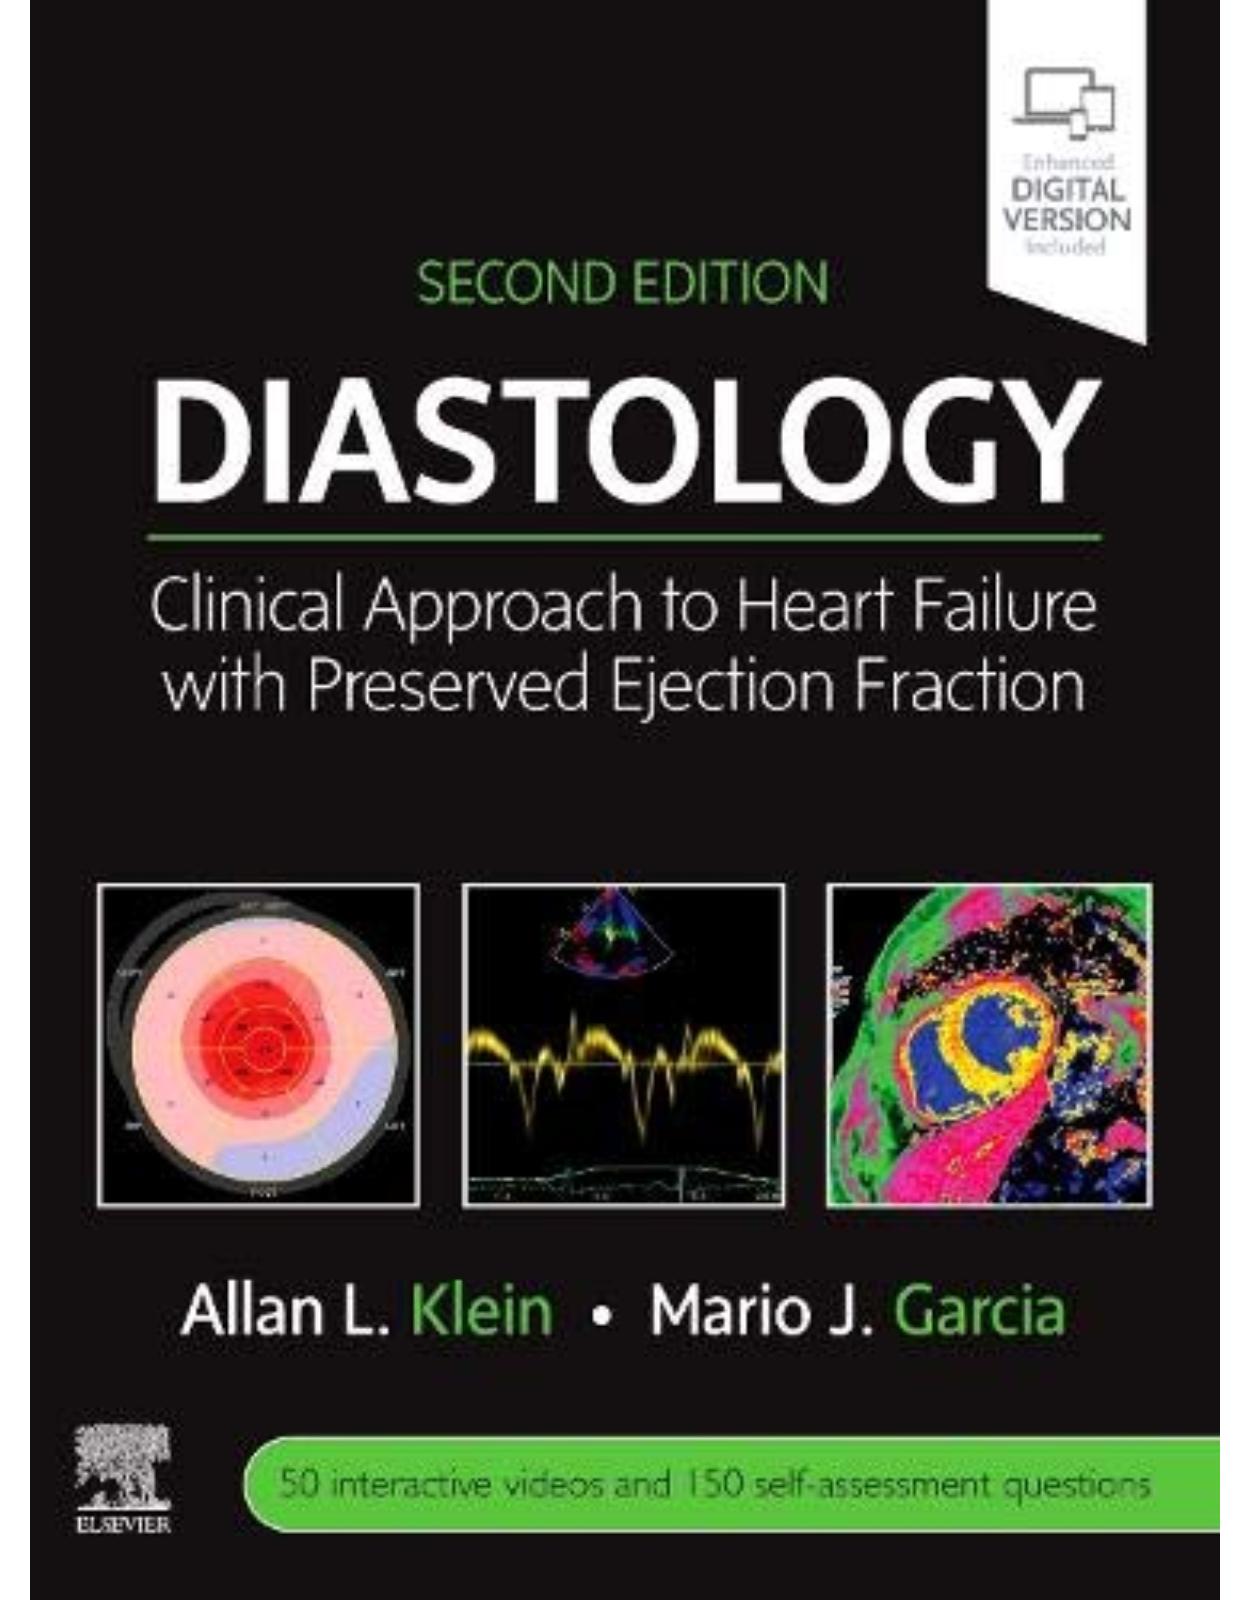 Diastology: Clinical Approach to Heart Failure with Preserved Ejection Fraction